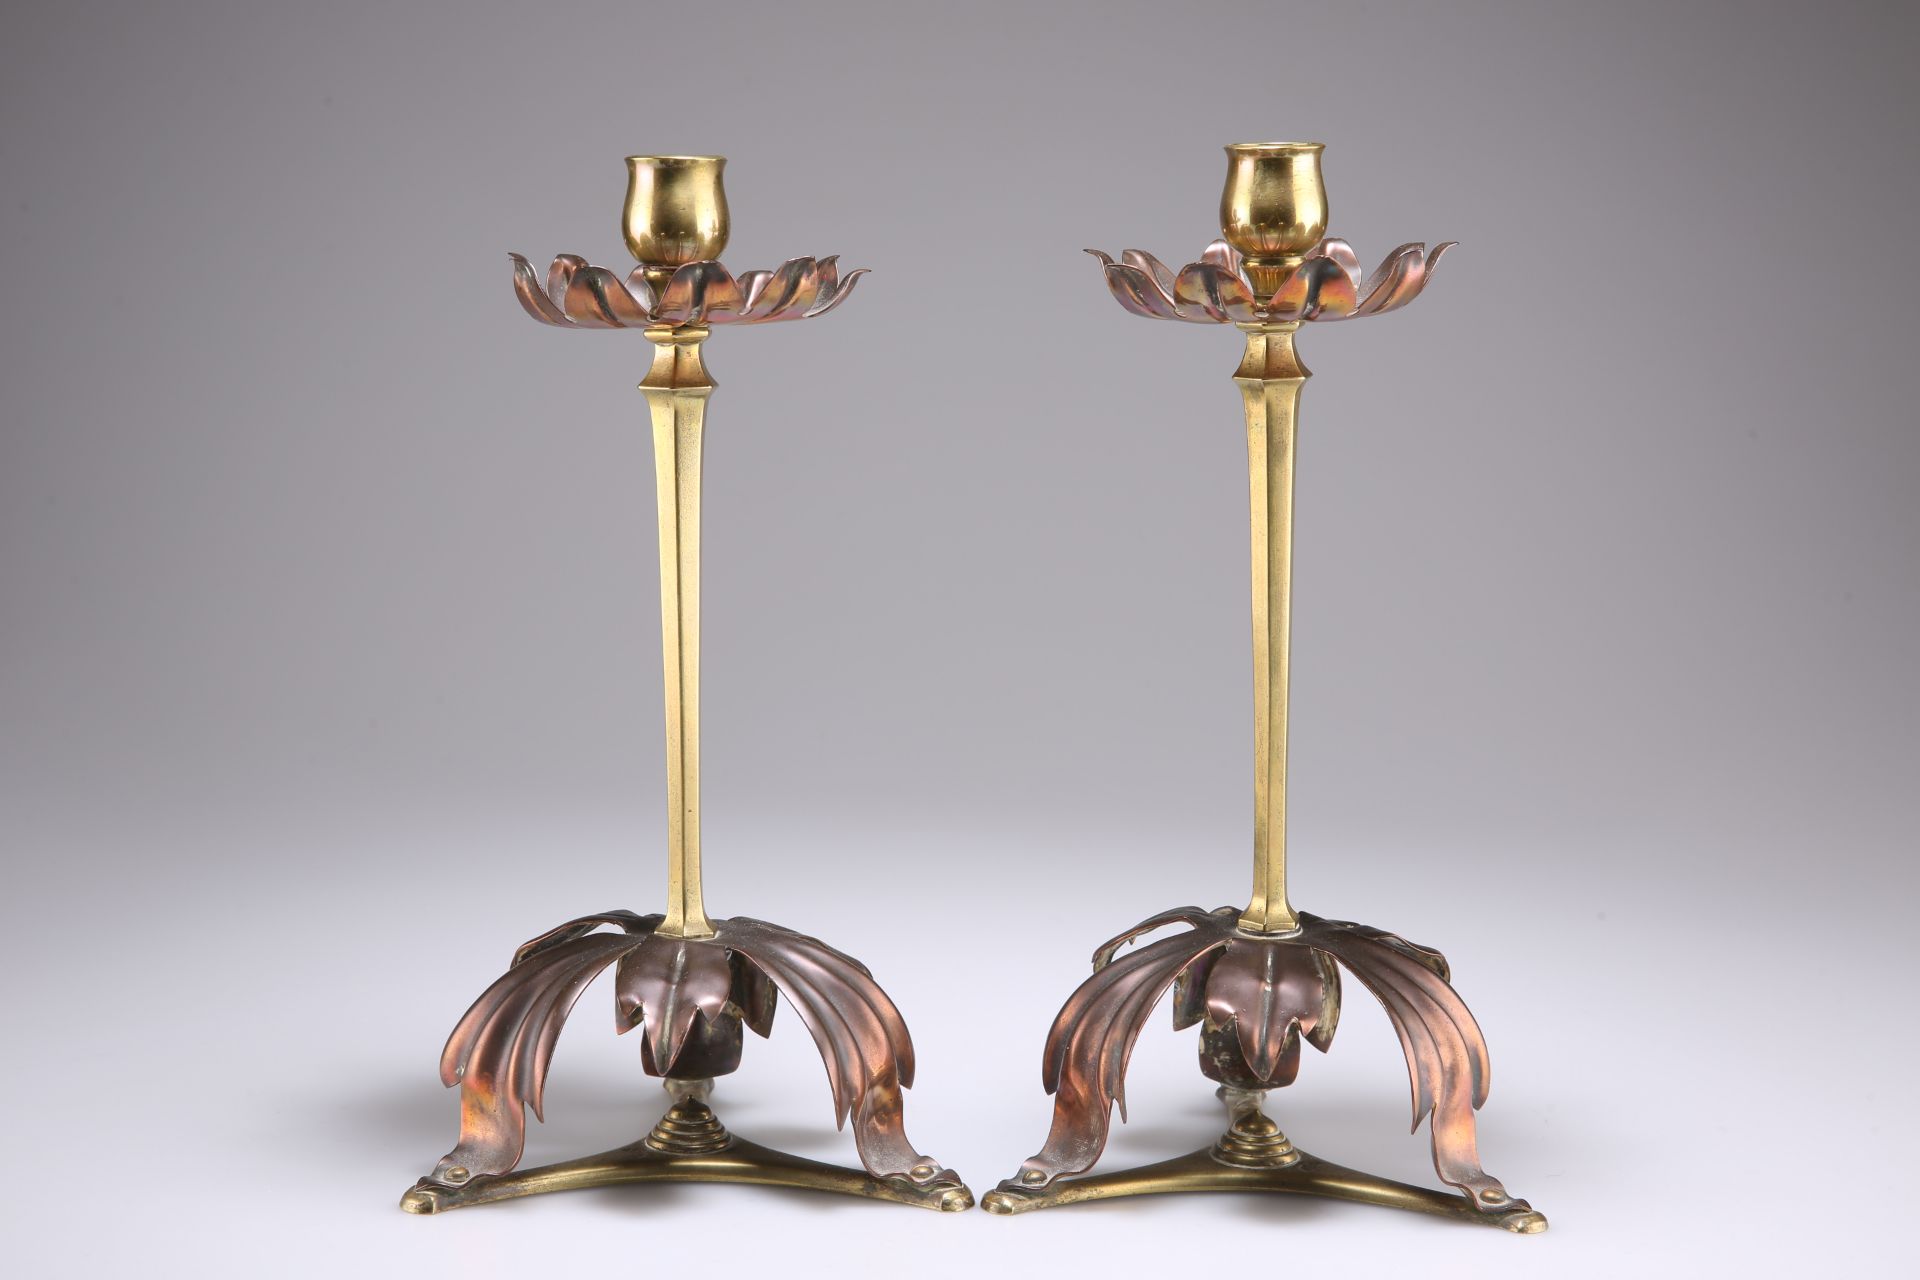 WILLIAM ARTHUR SMITH (W.A.S) BENSON (1854-1924), A PAIR OF ARTS & CRAFTS BRASS AND COPPER CANDLESTIC